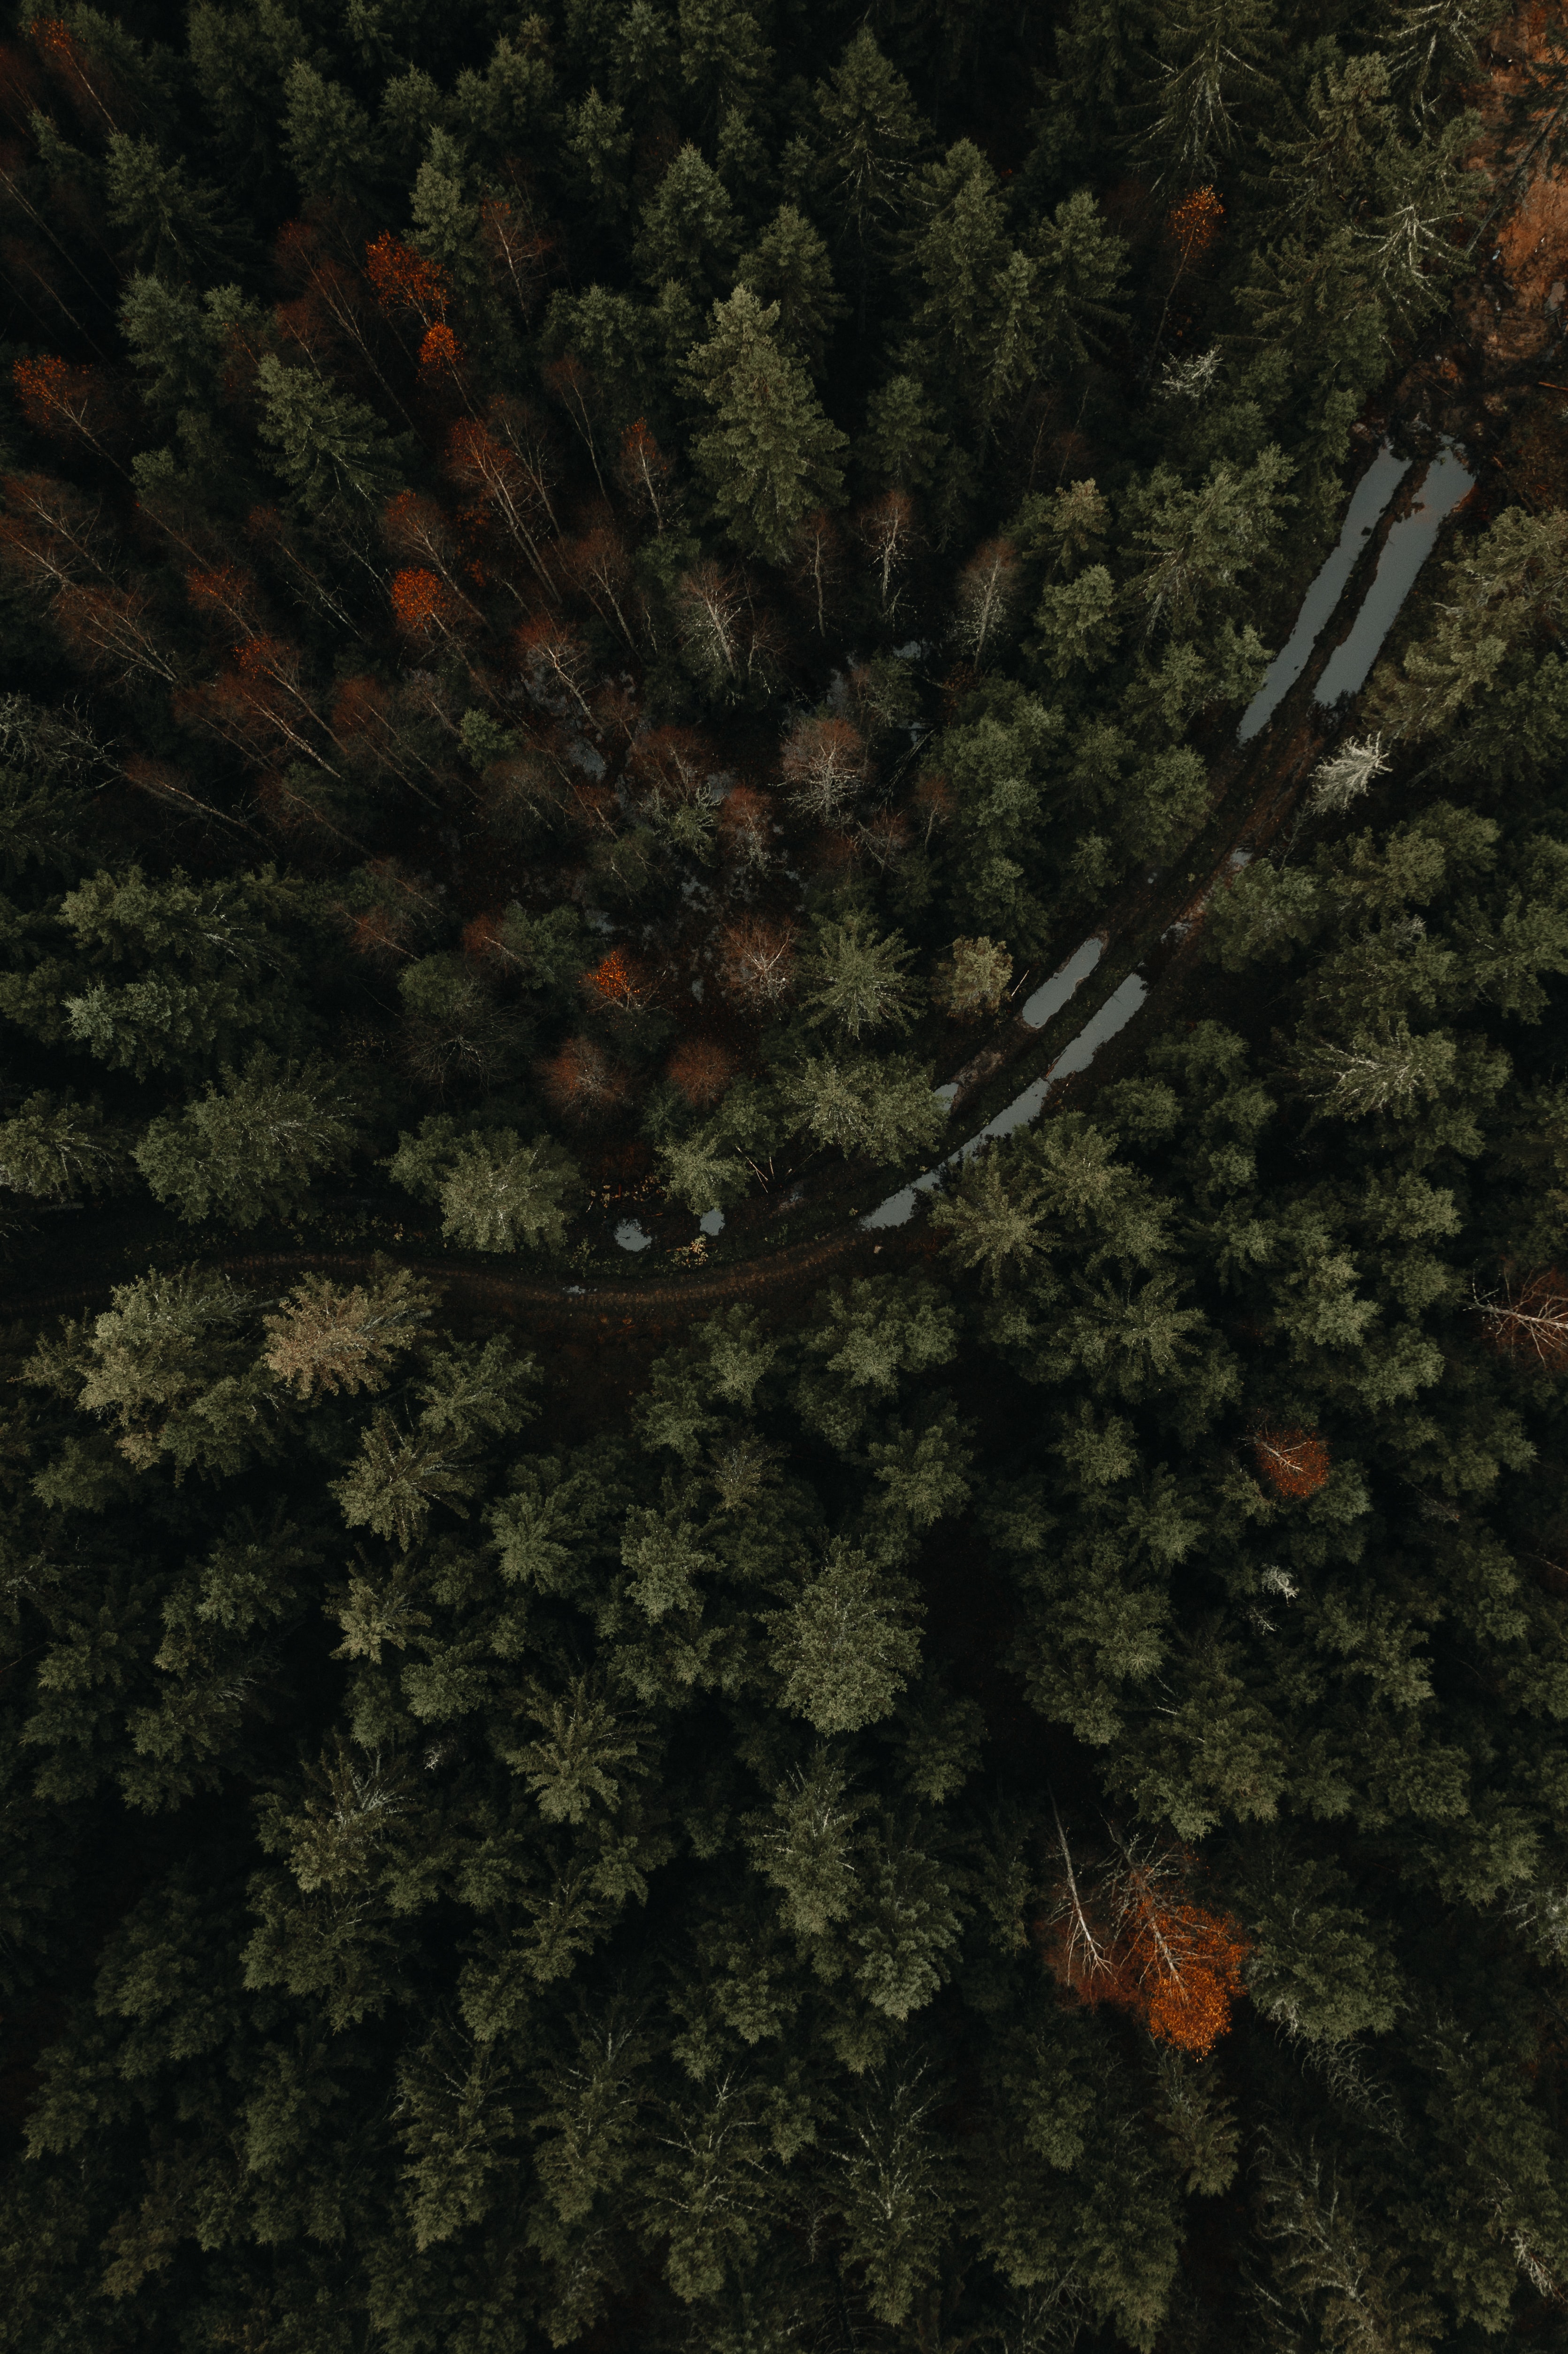 HD wallpaper view from above, nature, trees, road, forest, puddles